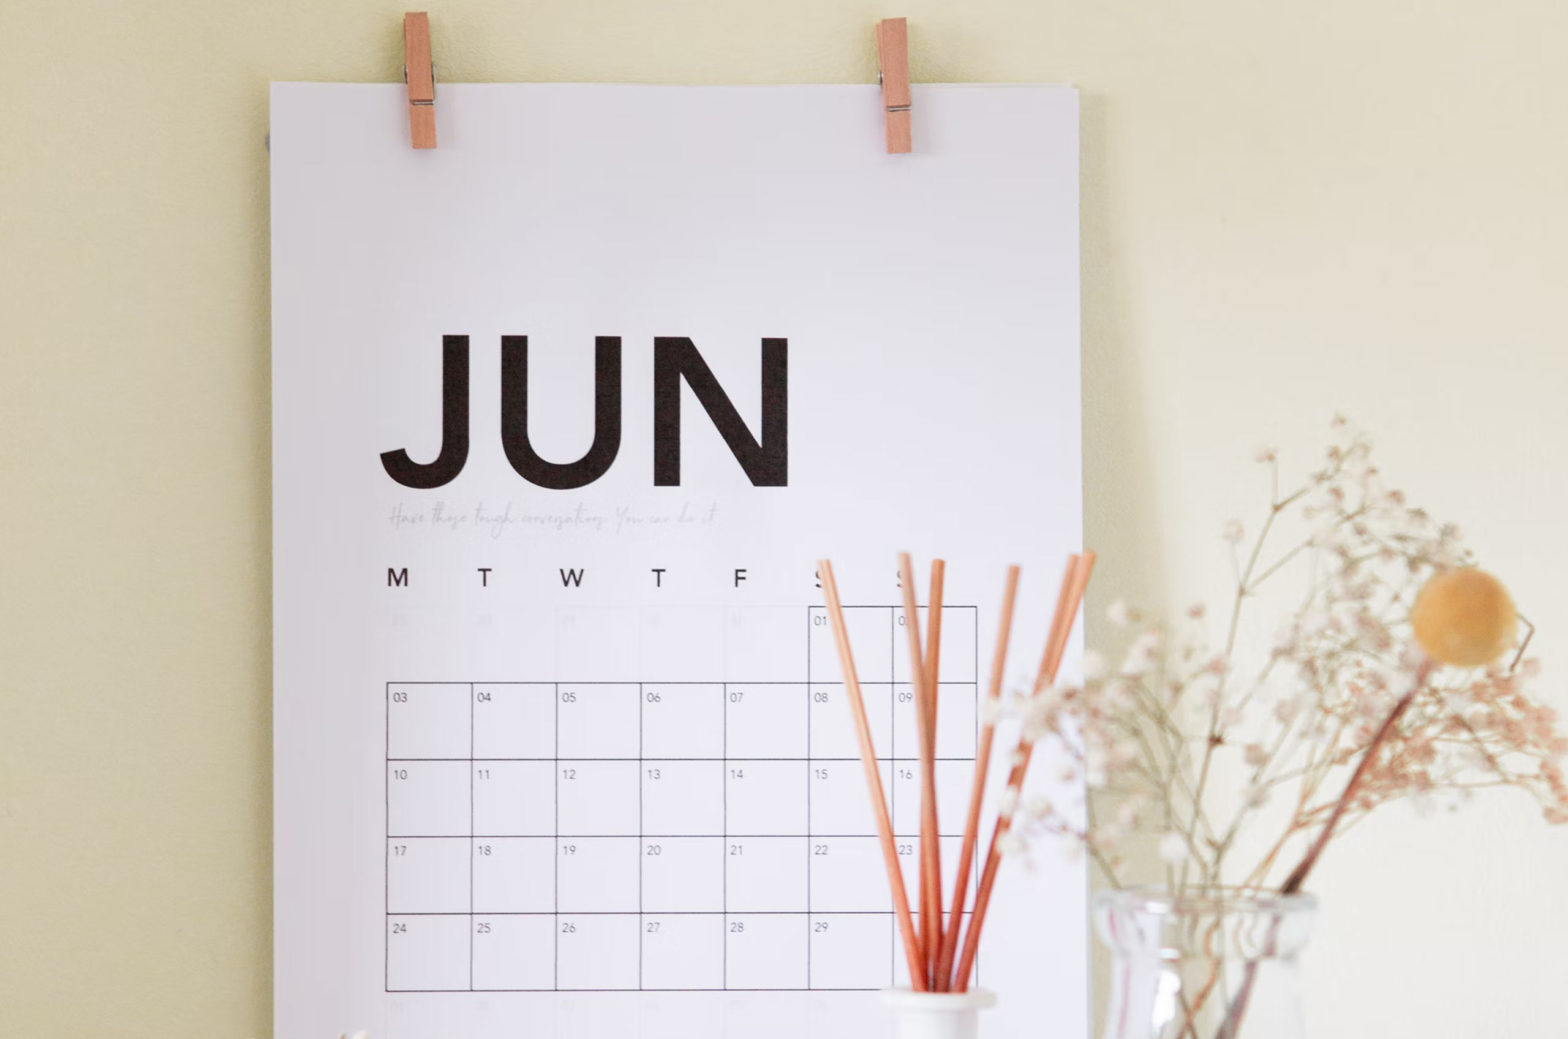 A printed calendar of June 2022 with flowers in front